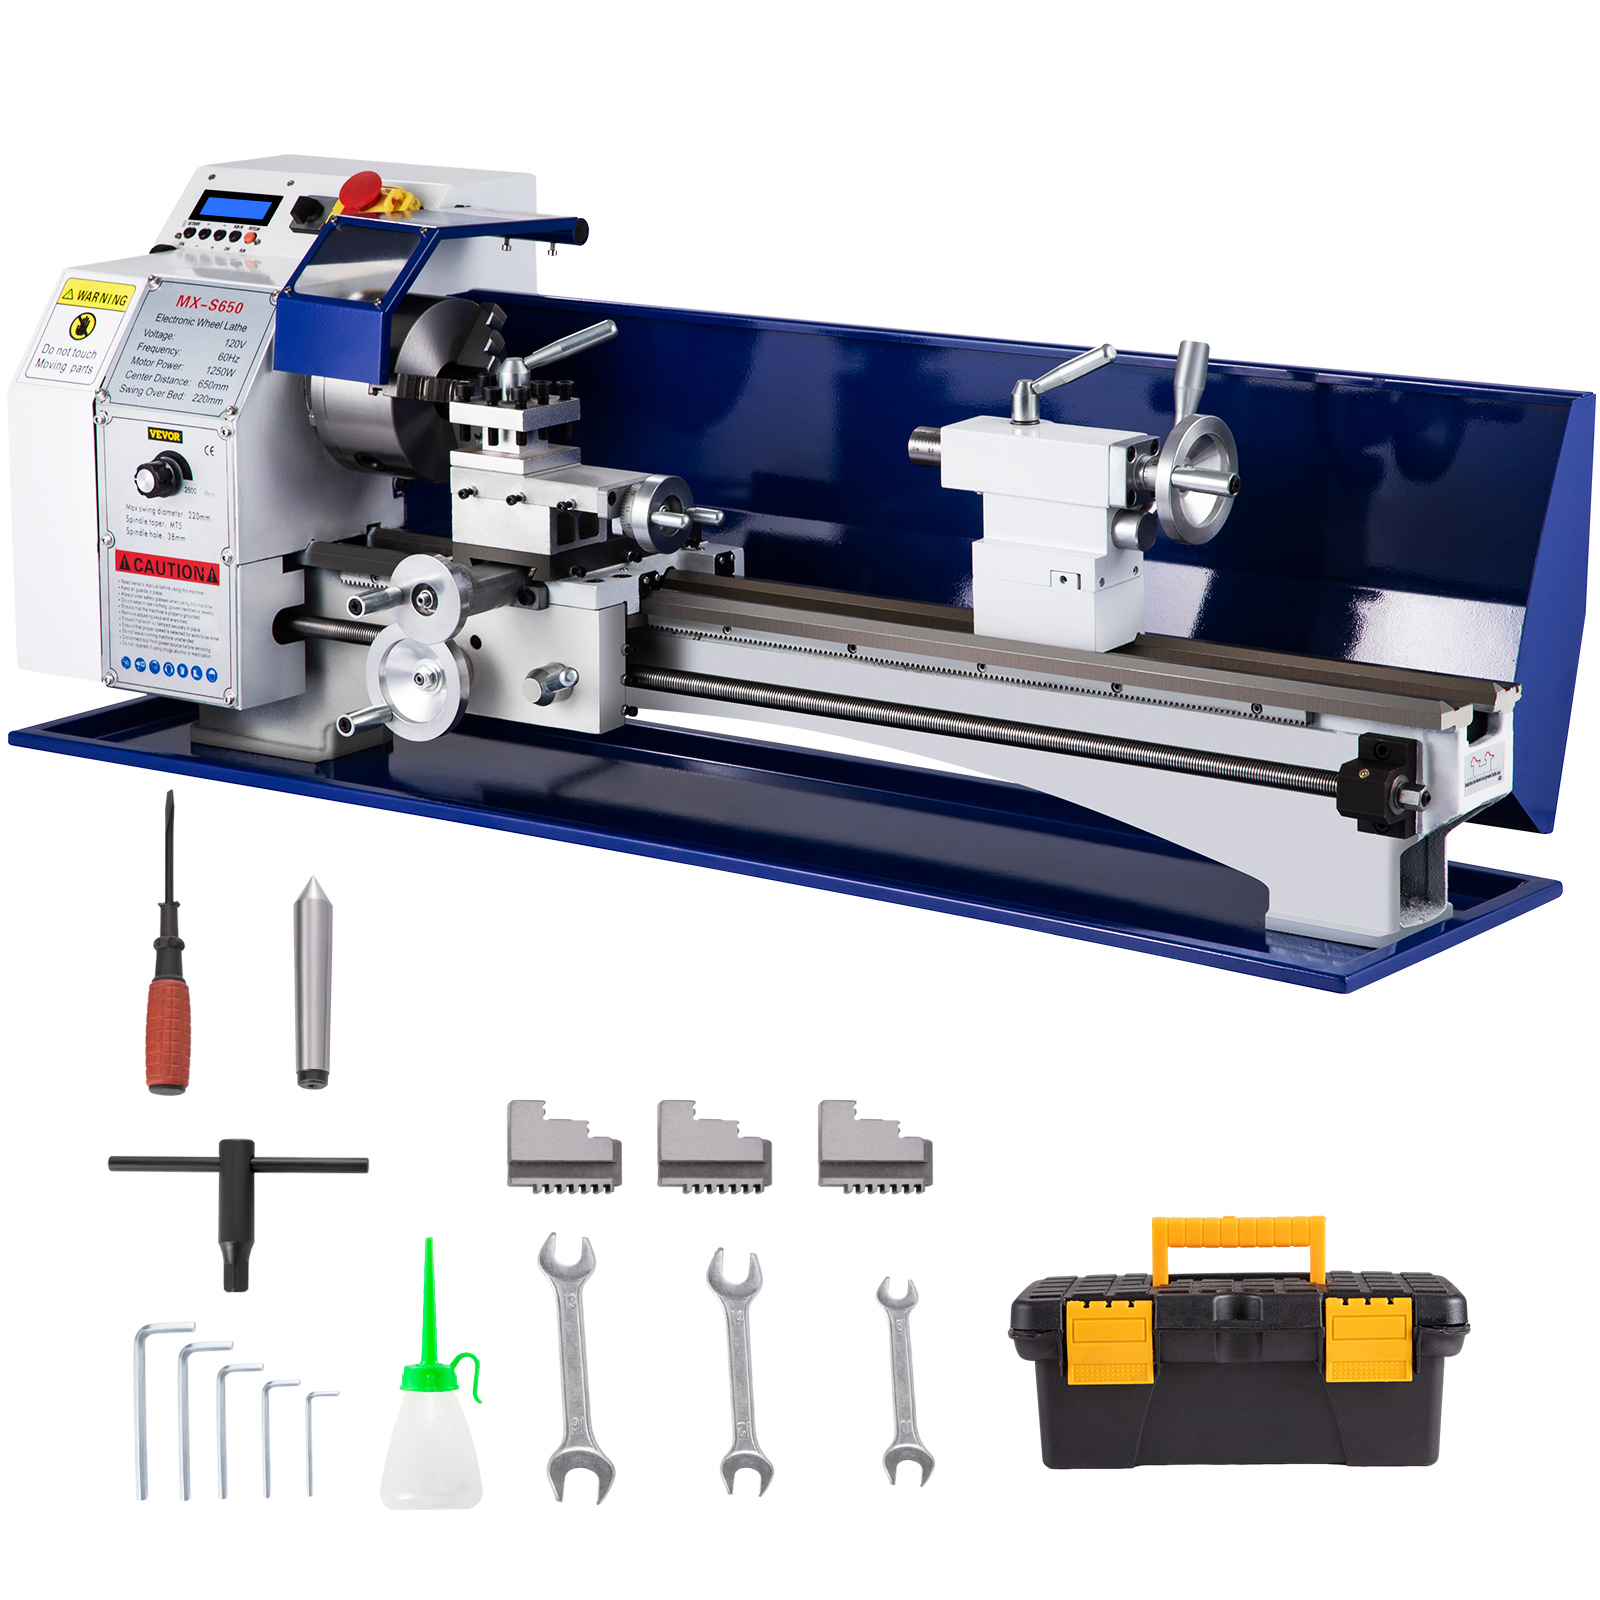 VEVOR Mini Metal Lathe, Automatic Thread Processing, 1.75KW Direct Drive  Motor Lathe Machine w/ Infinitely Variable Speed, Precision Turning Tool w/  Chuck Jaws Center for Metal Machining, CE Certified VEVOR US